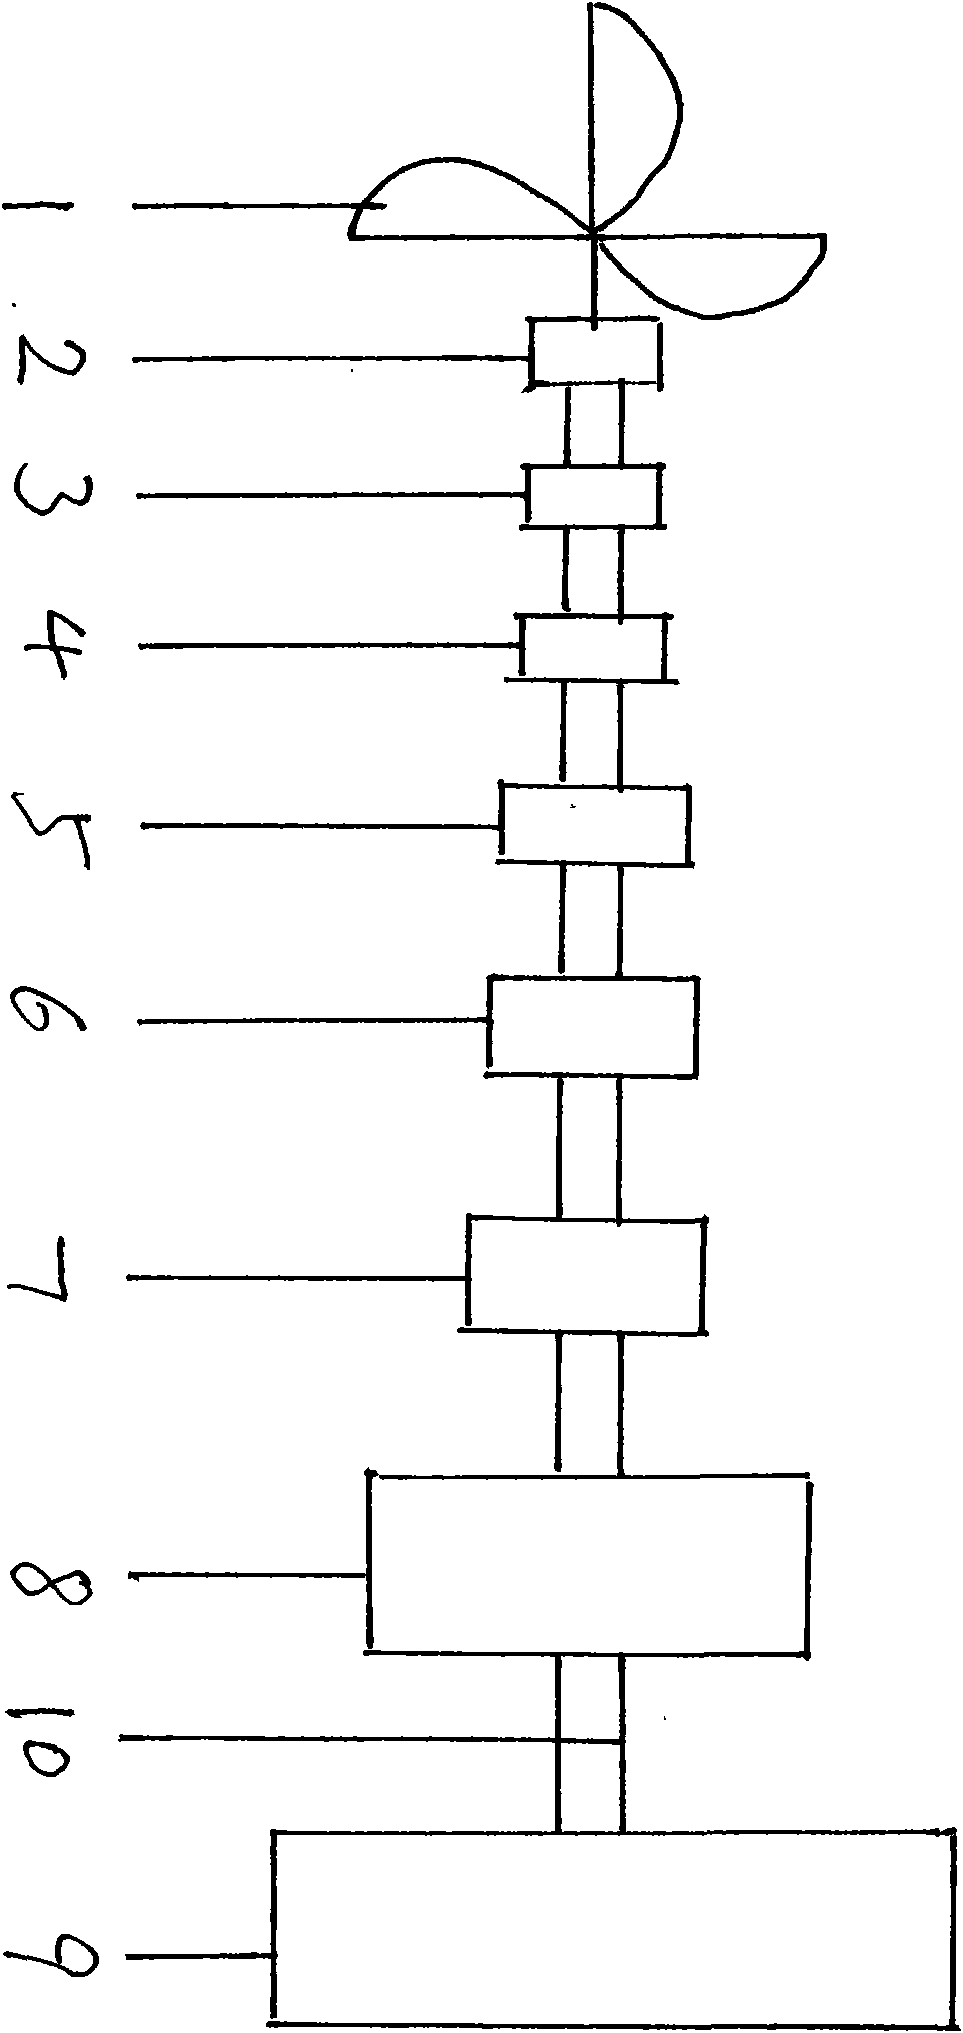 Automatically-charging device for motor vehicle and purpose thereof